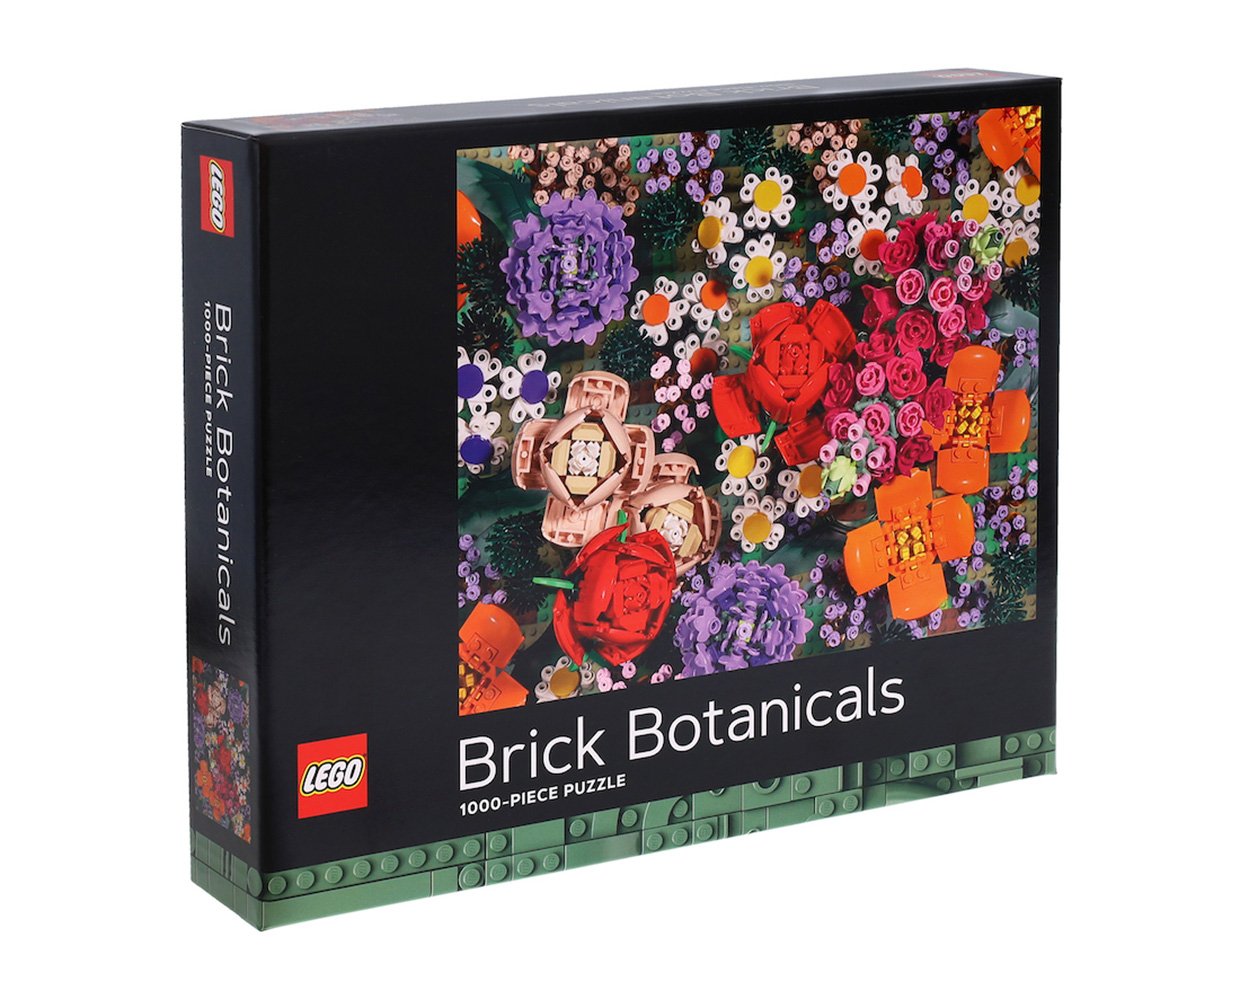 Give the Gift of Plastic Flowers with the LEGO Brick Botanicals Puzzle